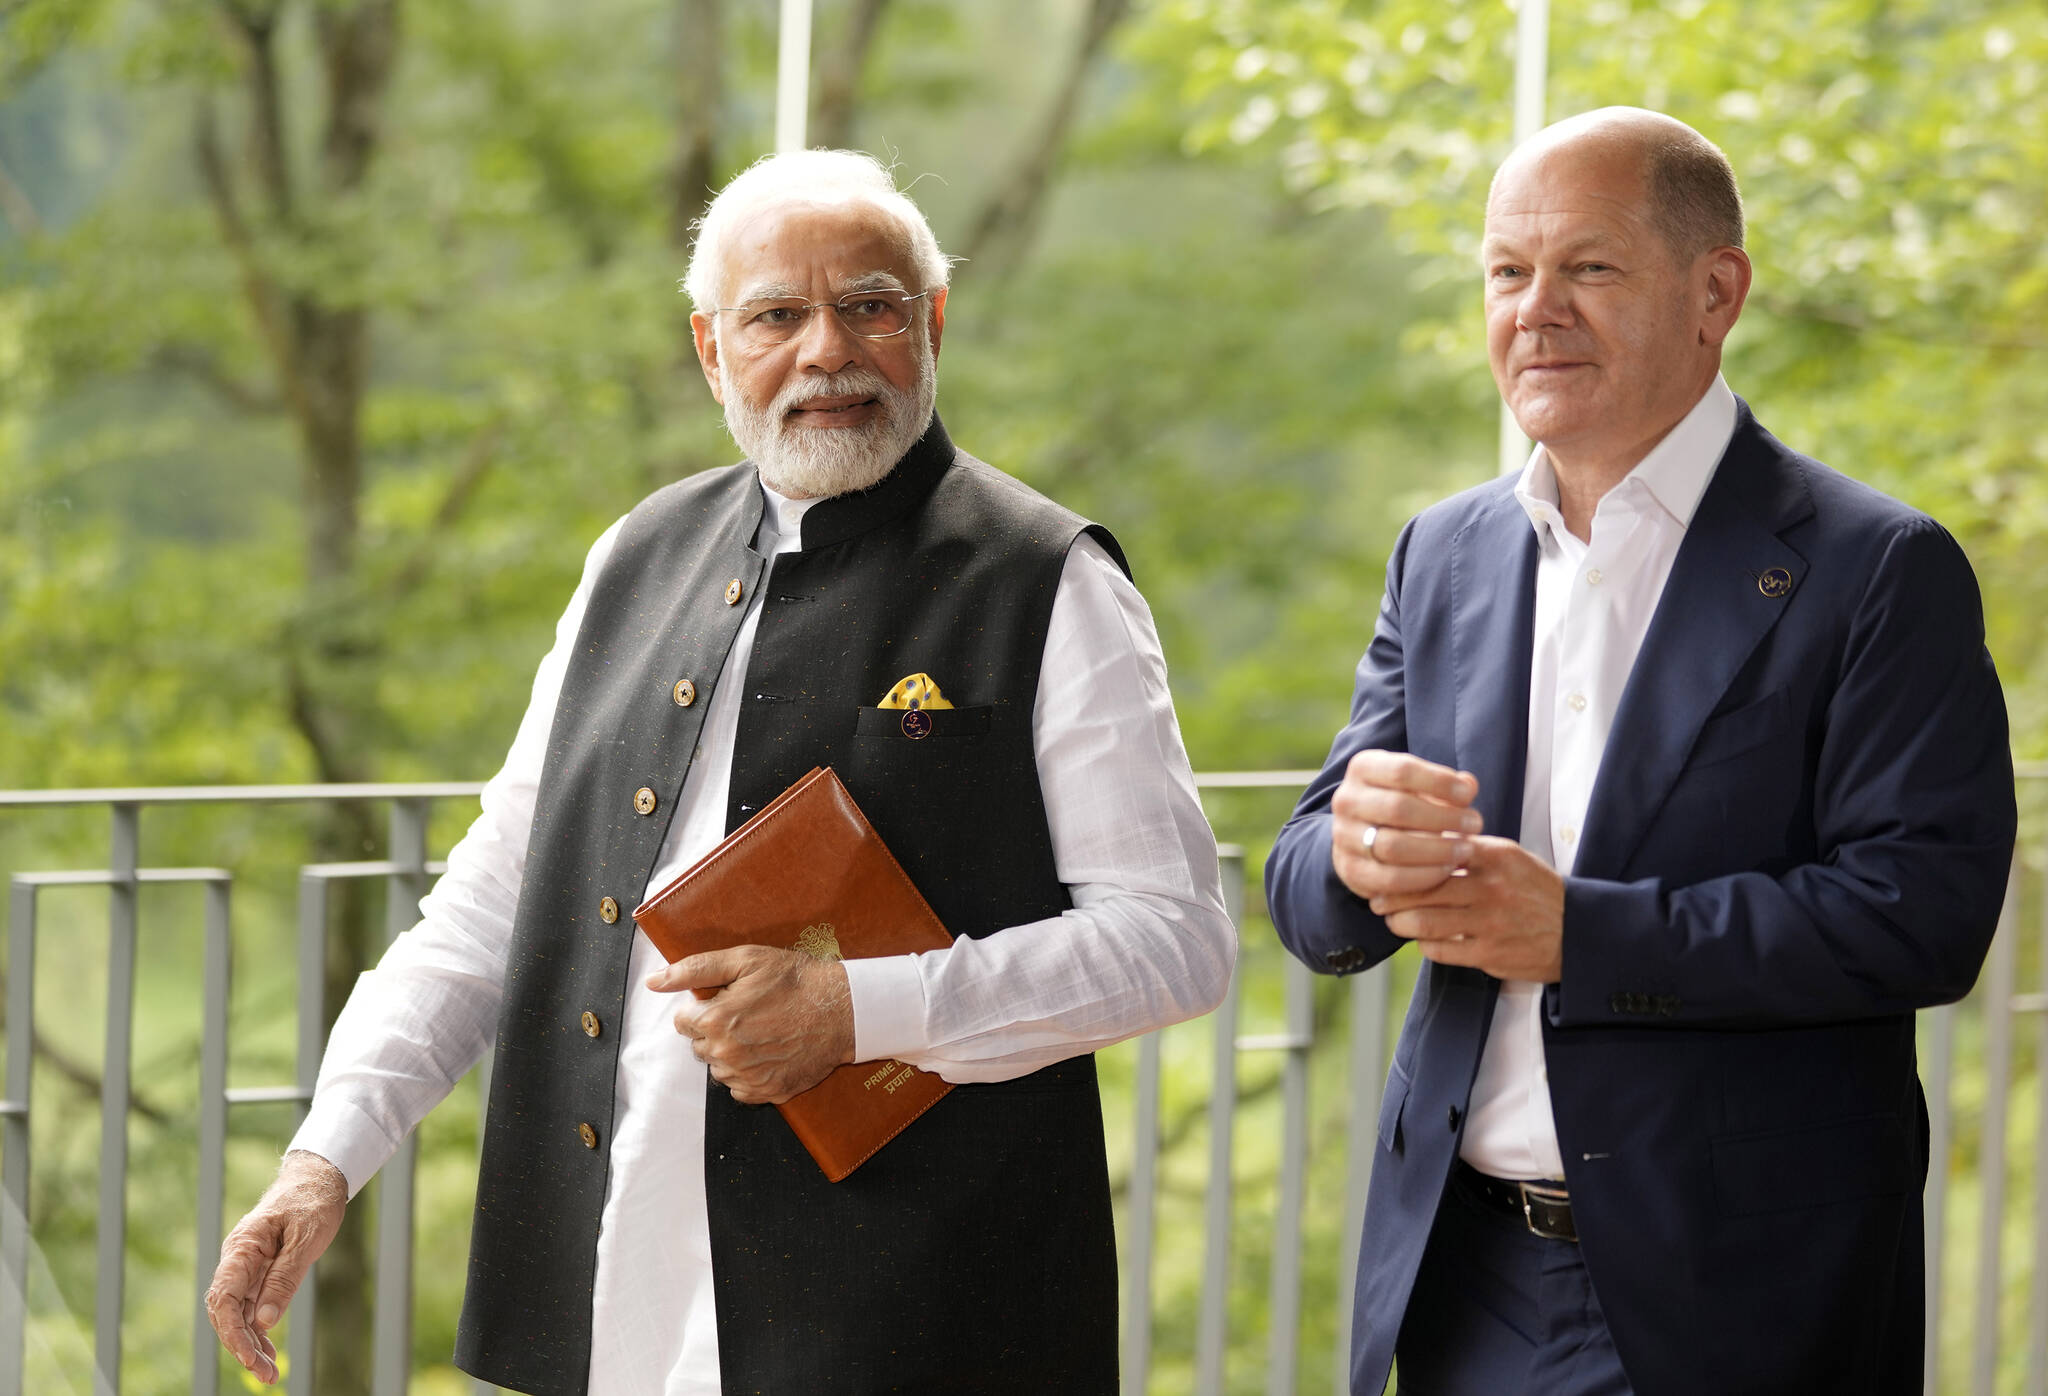 German Chancellor Olaf Scholz, right, walks with India’s Prime Minister Narendra Modi prior to a meeting on the sidelines of the G7 summit at Castle Elmau in Kruen, near Garmisch-Partenkirchen, Germany, on Monday, June 27, 2022. The Group of Seven leading economic powers are meeting in Germany for their annual gathering Sunday through Tuesday. (AP Photo/Markus Schreiber, Pool)